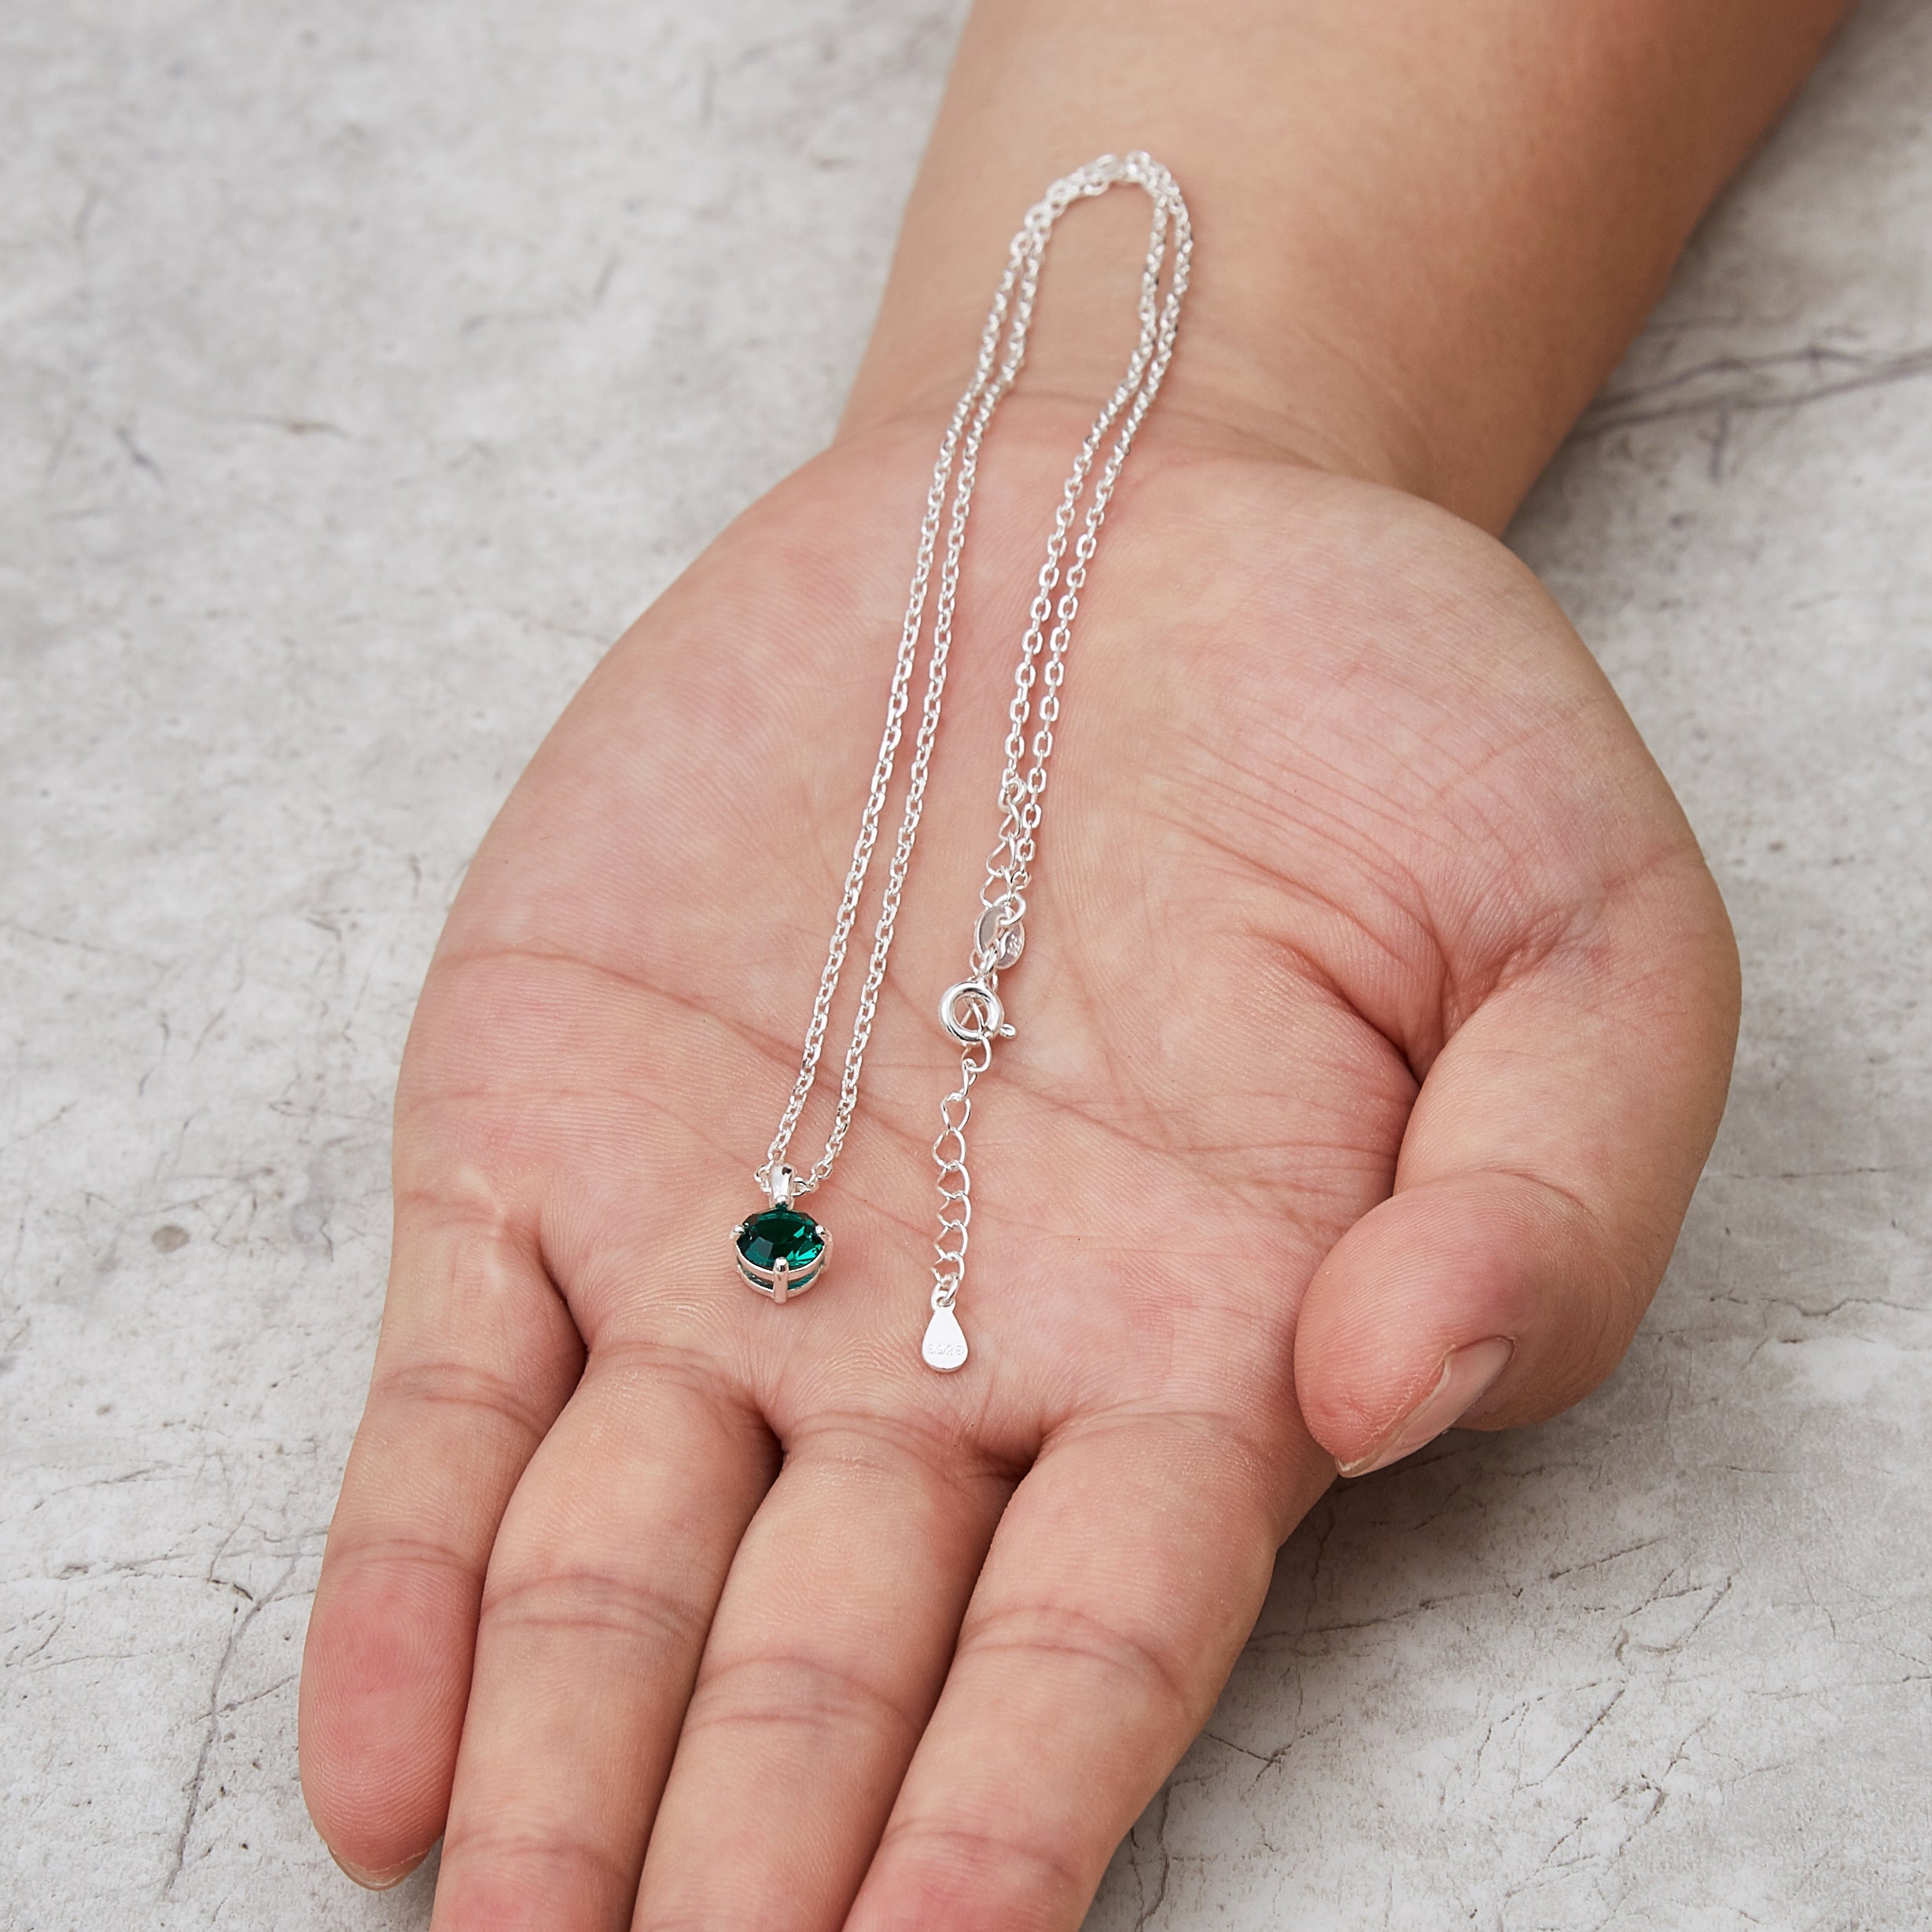 Sterling Silver Green Necklace Created with Zircondia® Crystals